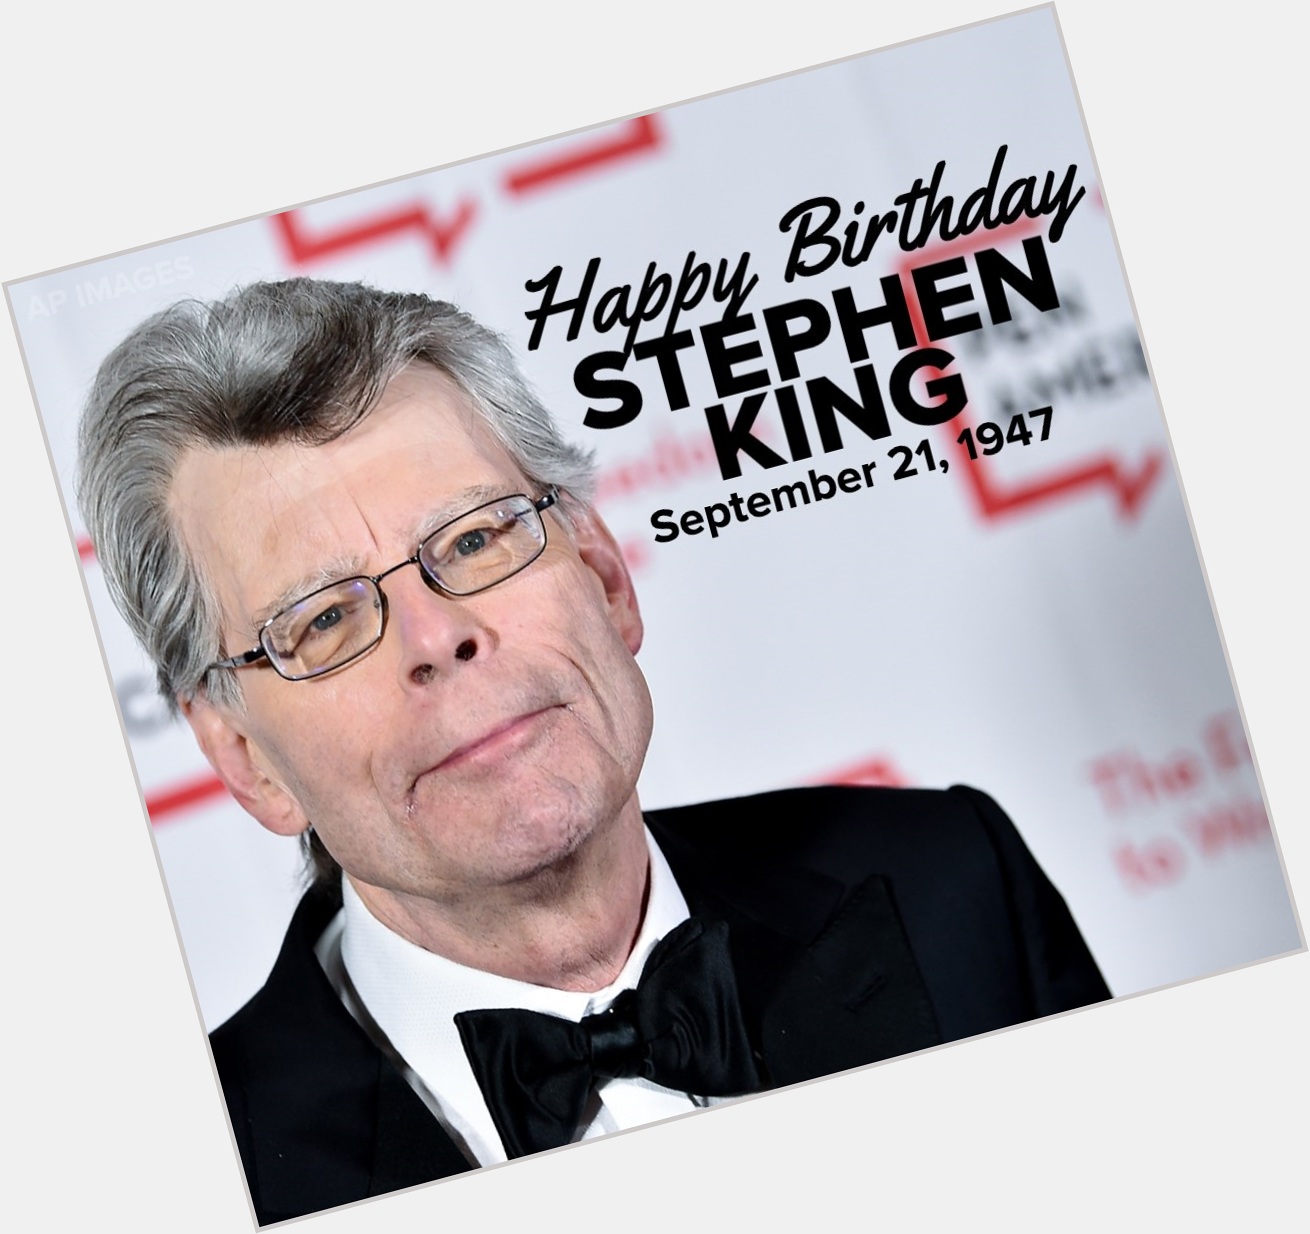 HAPPY BIRTHDAY! Today Stephen King, American author of horror and supernatural fiction, turns 73! 